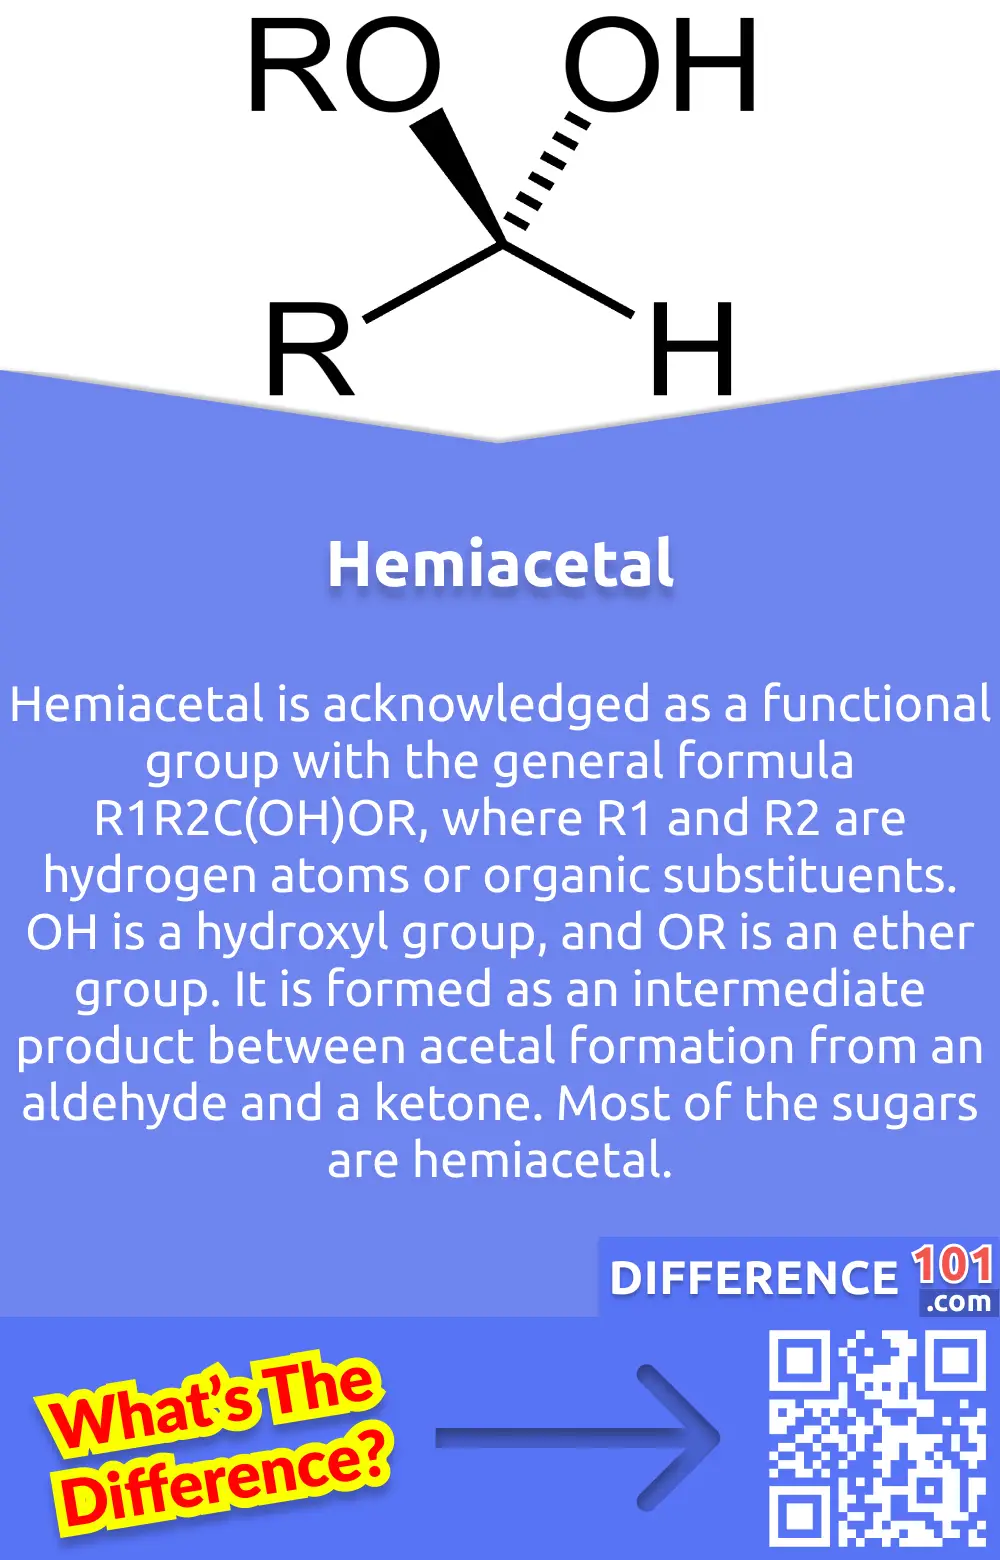 What is a Hemiacetal? Hemiacetal is acknowledged as a functional group with the general formula R1R2C(OH)OR, where R1 and R2 are hydrogen atoms or organic substituents. OH is a hydroxyl group, and OR is an ether group. It is formed as an intermediate product between acetal formation from an aldehyde and a ketone. Most of the sugars are hemiacetal.